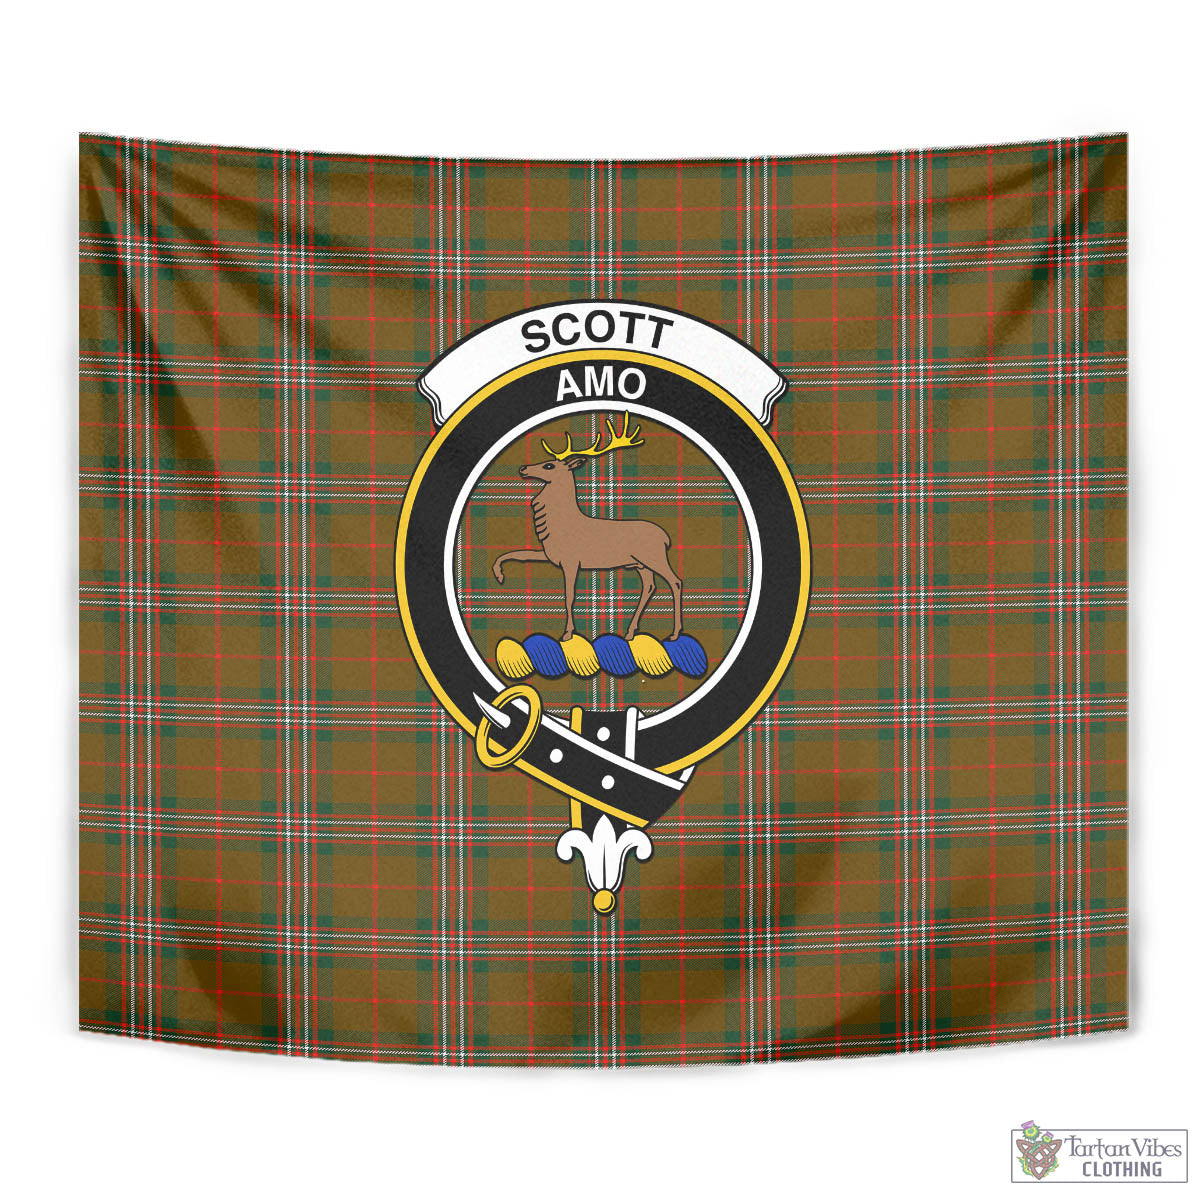 Tartan Vibes Clothing Scott Brown Modern Tartan Tapestry Wall Hanging and Home Decor for Room with Family Crest